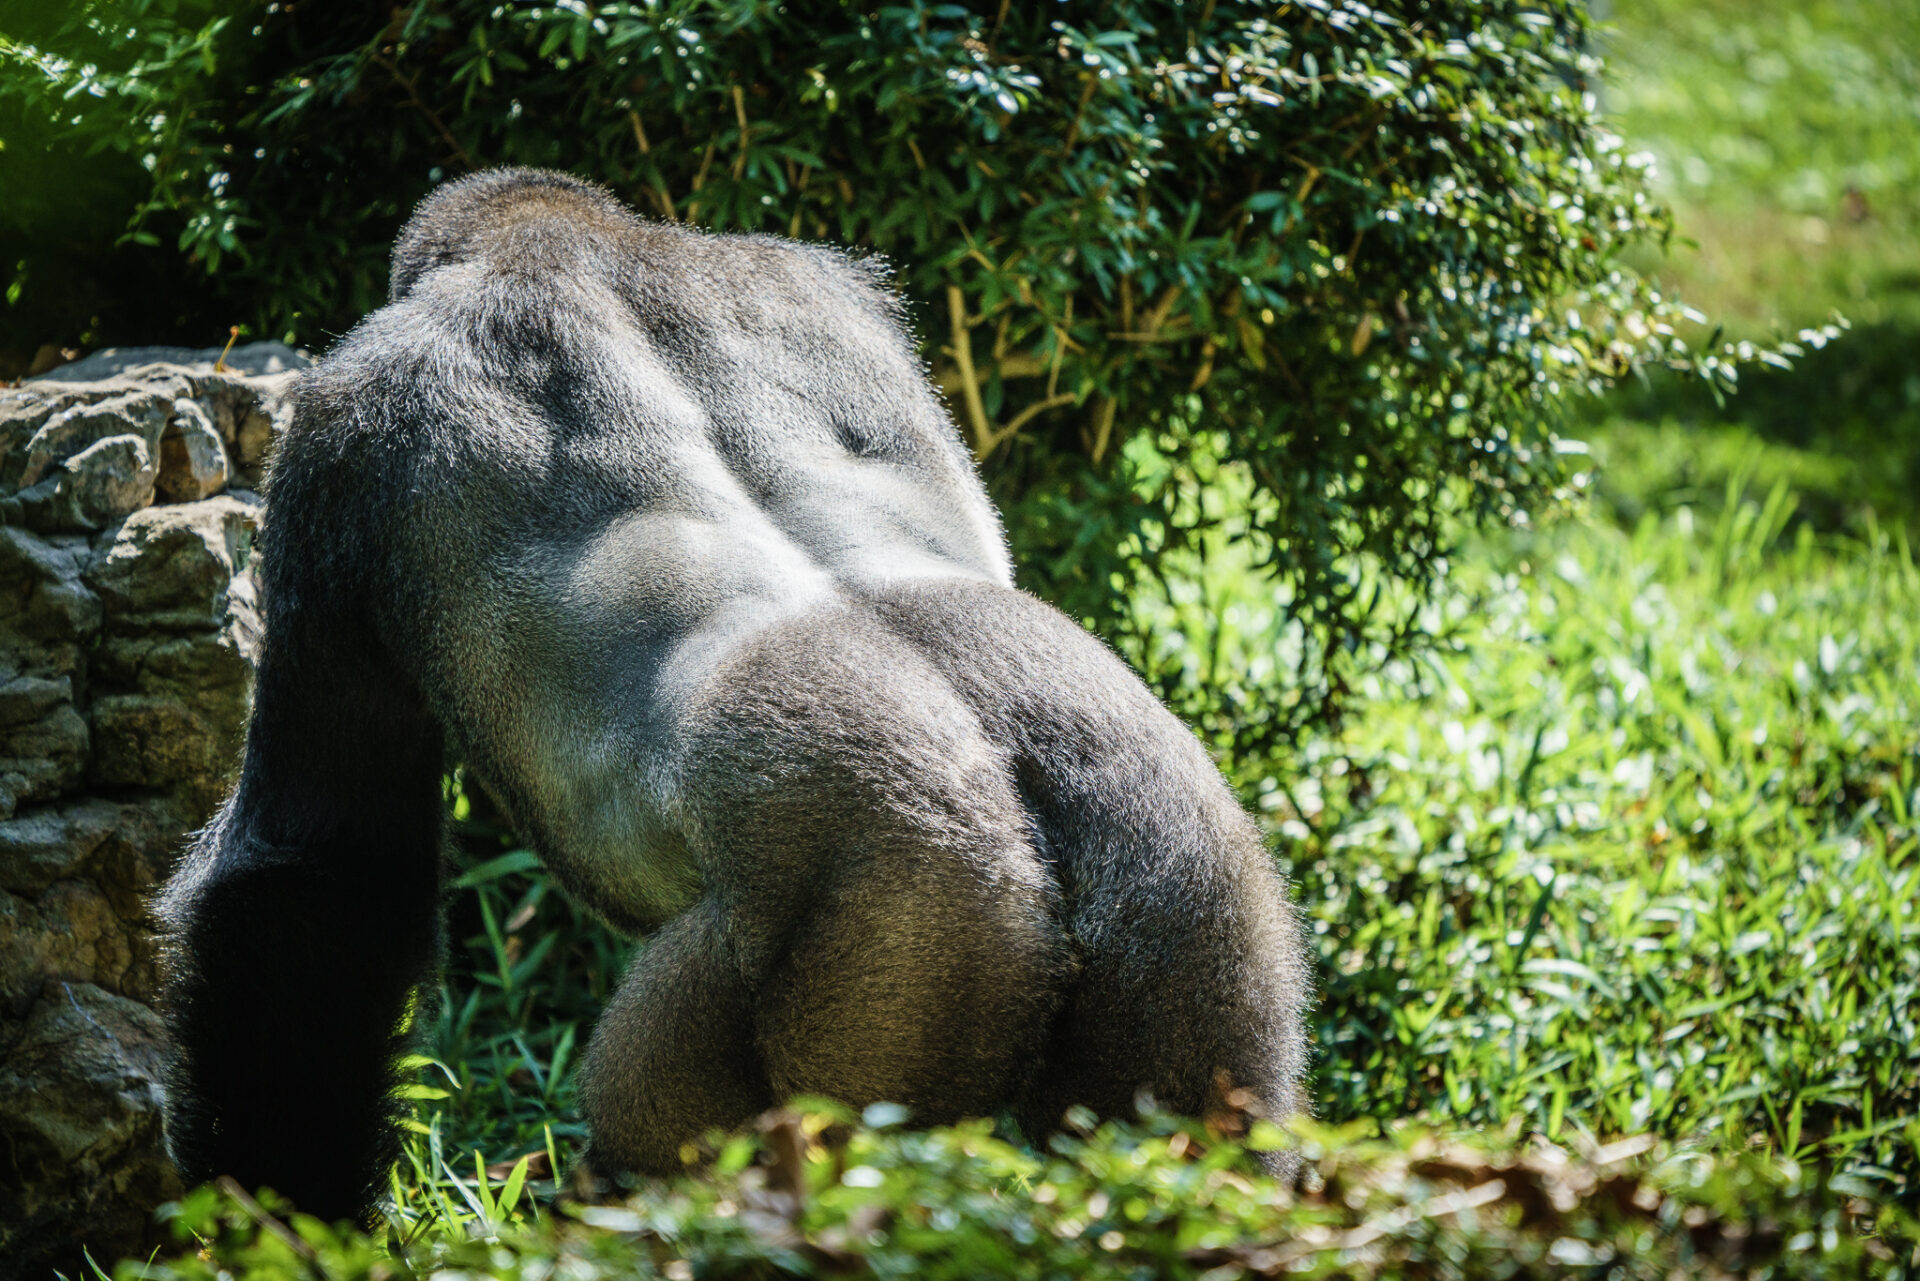 Check Out the Ass on That Gorilla